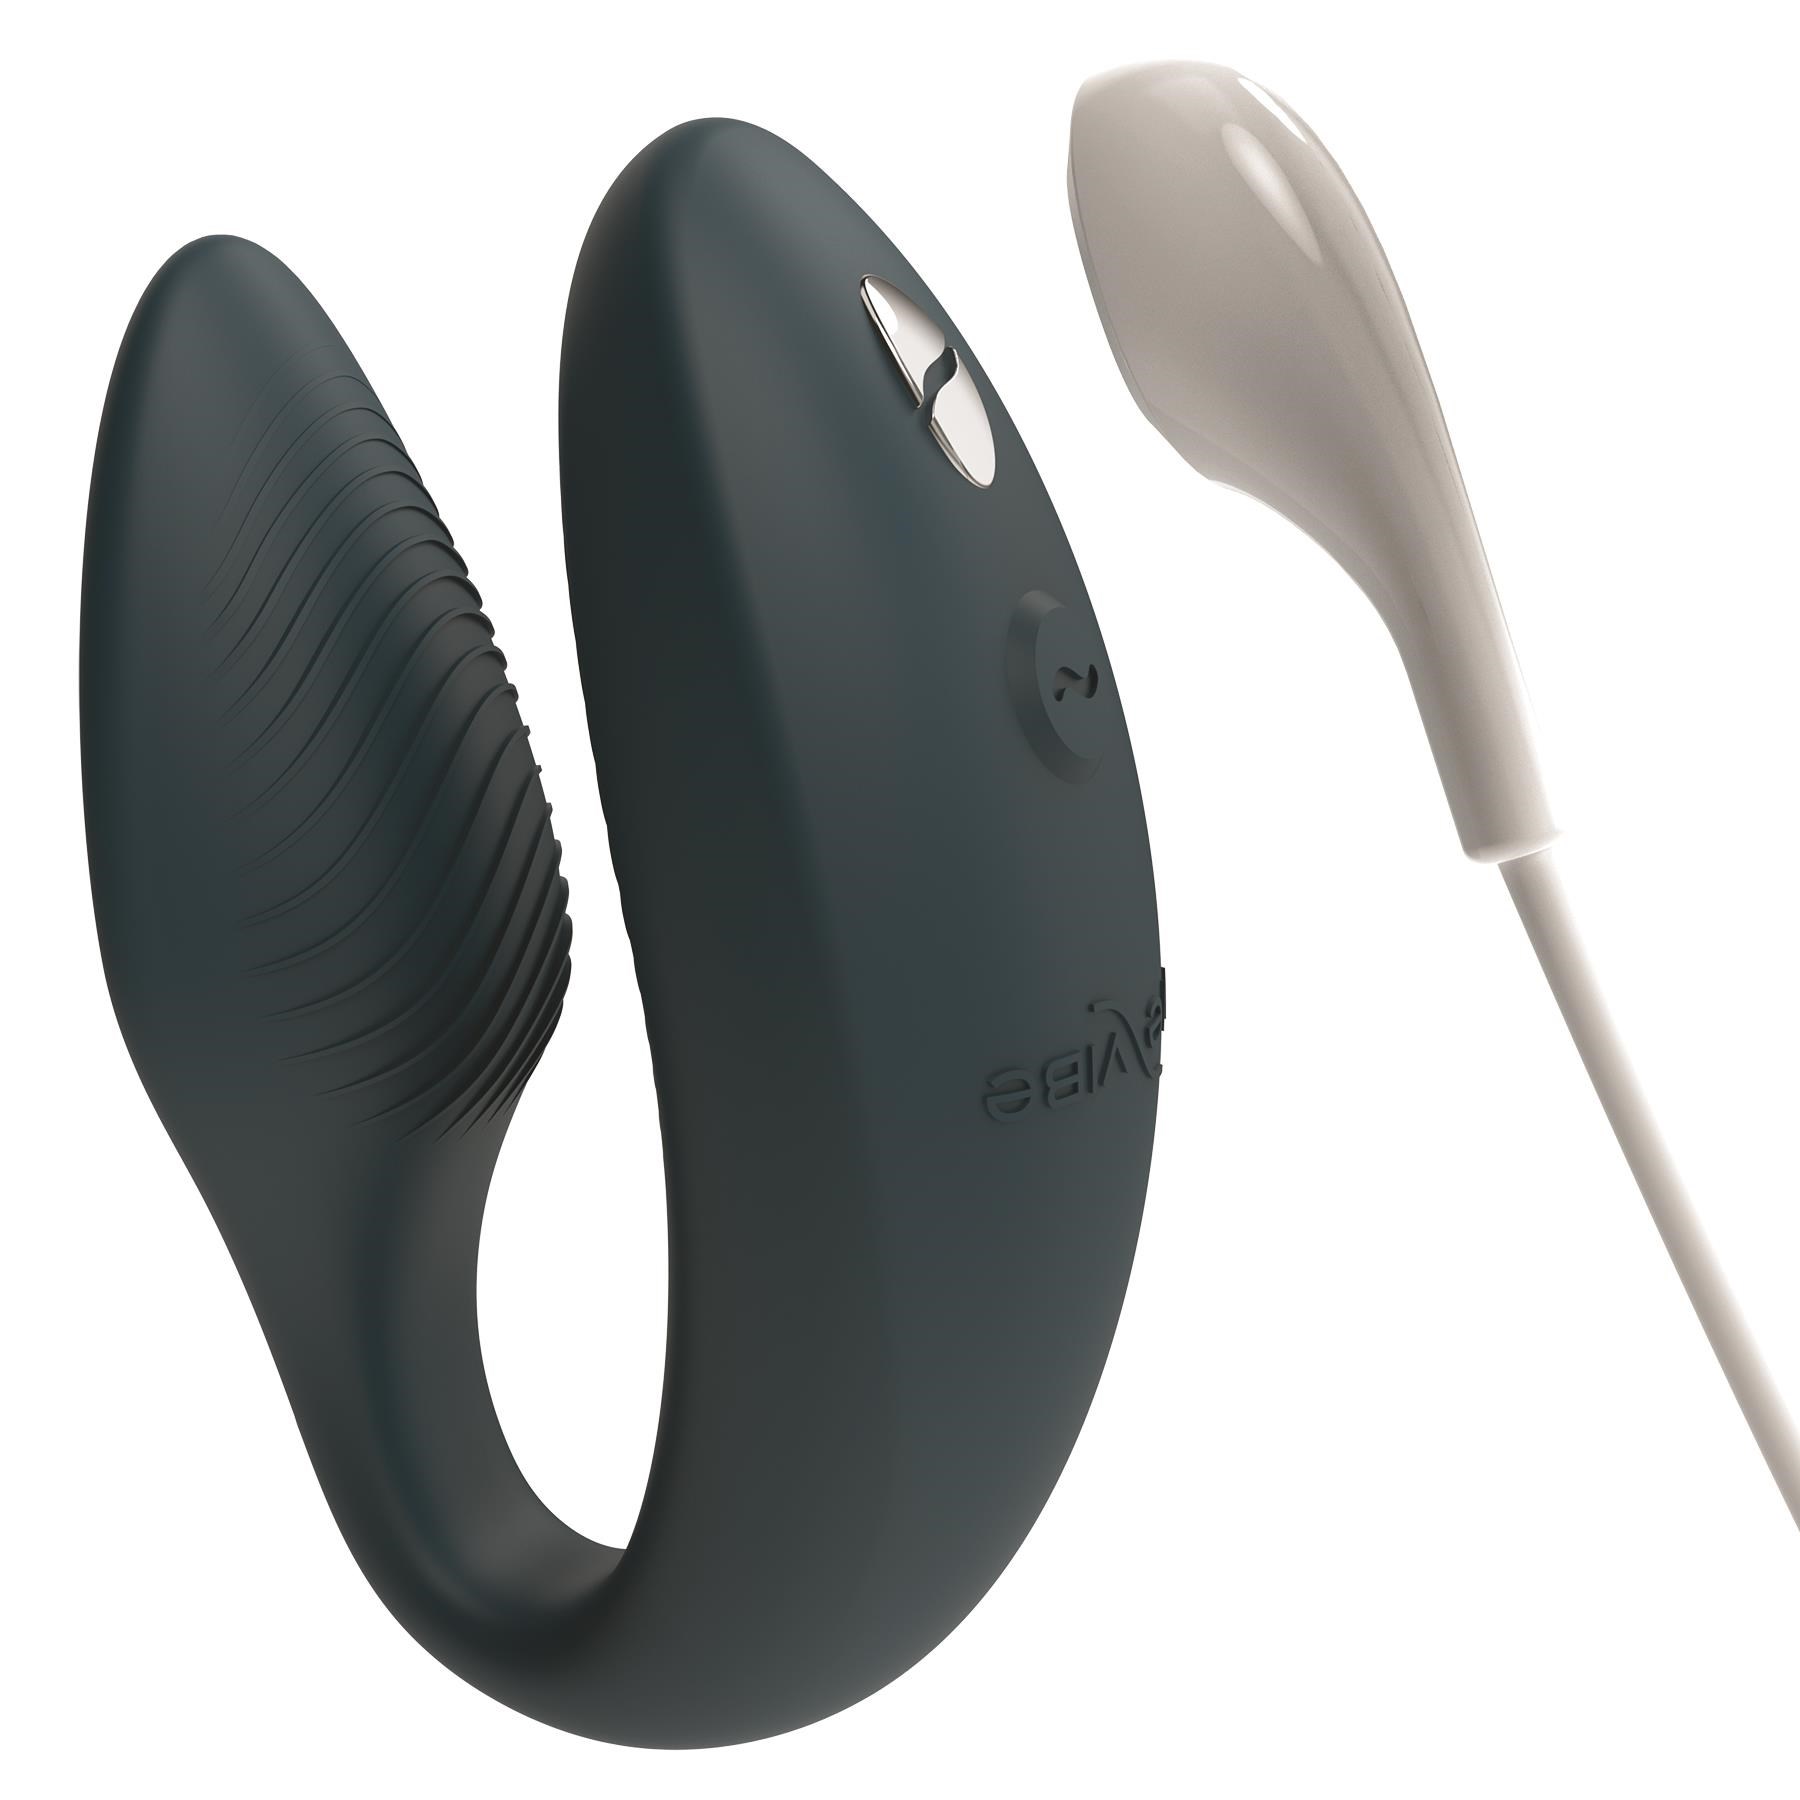 We-Vibe Sync 2 Couples Massager - Showing Where Charging Cable is Placed